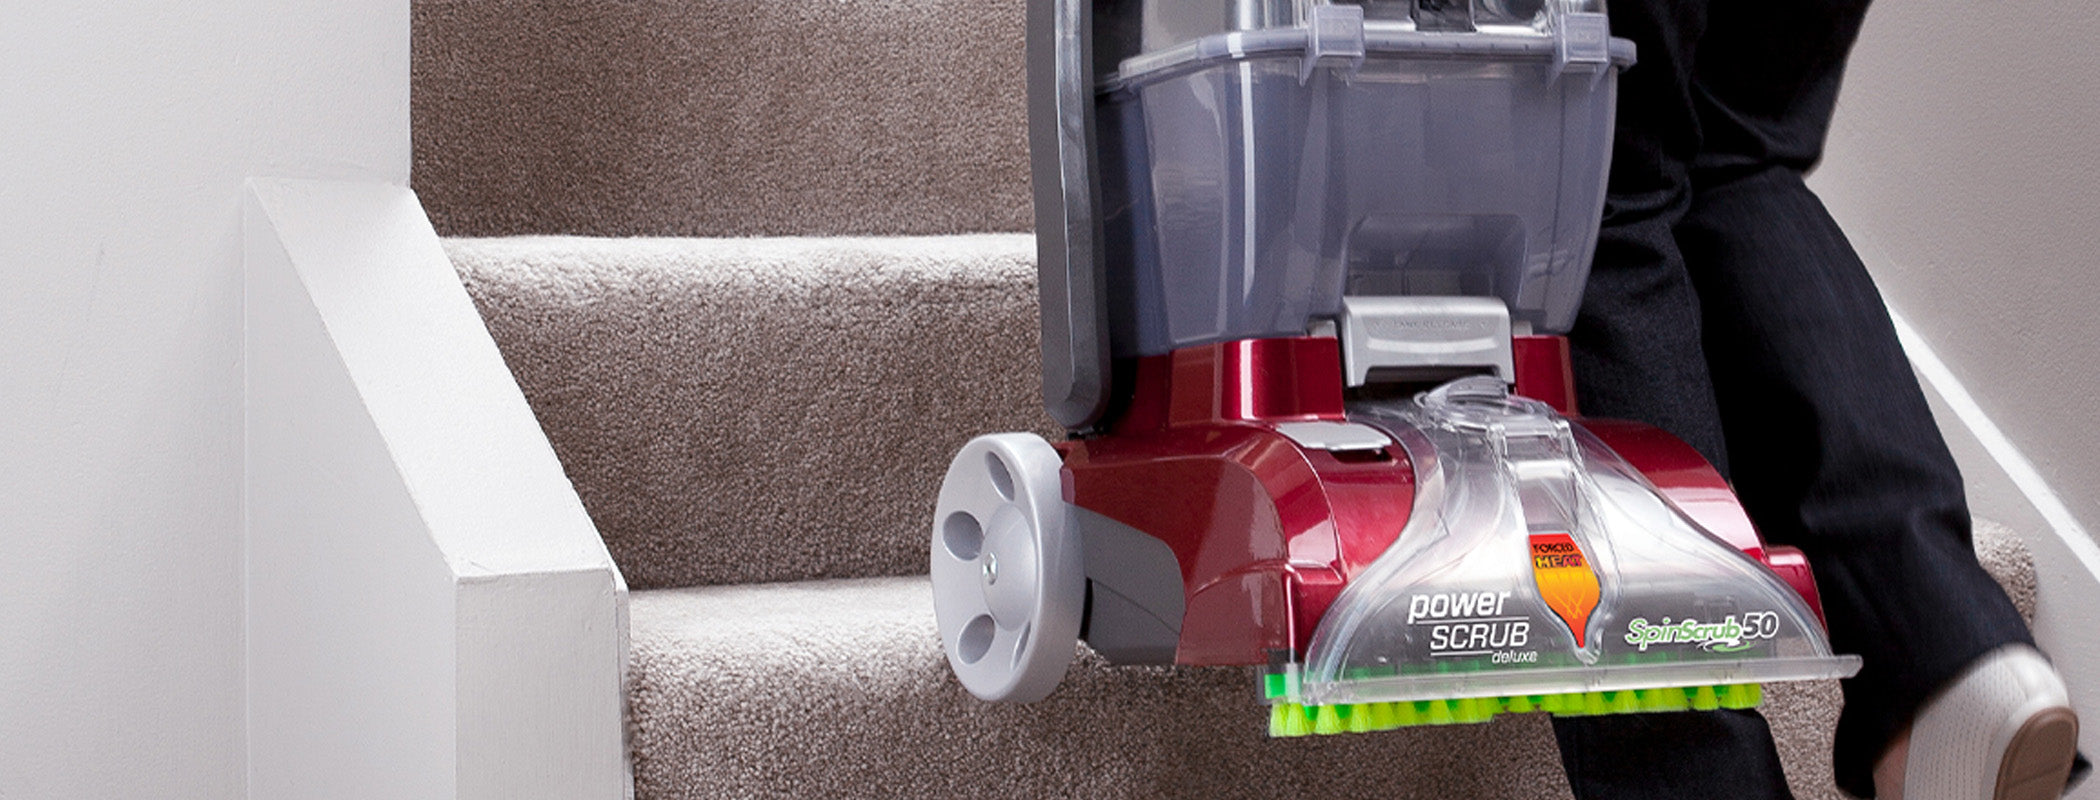 The Hoover Power Scrub Deluxe Has Over 47,000 Fans on